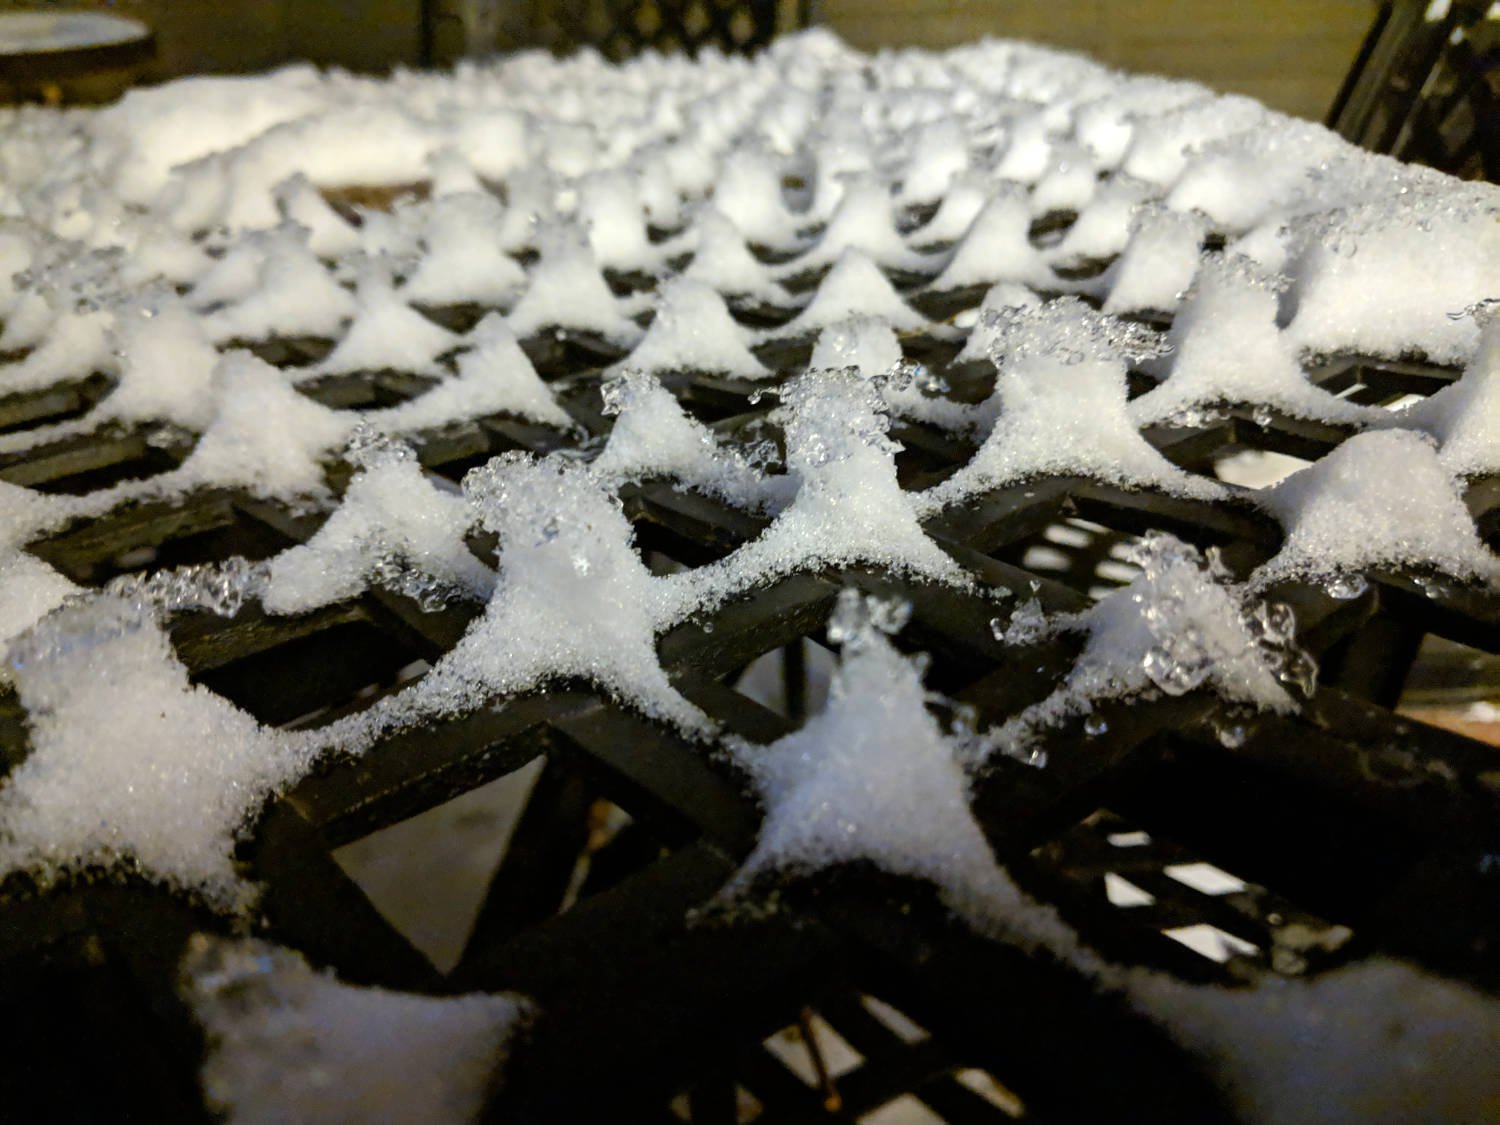 little towers of ice on a metal grate